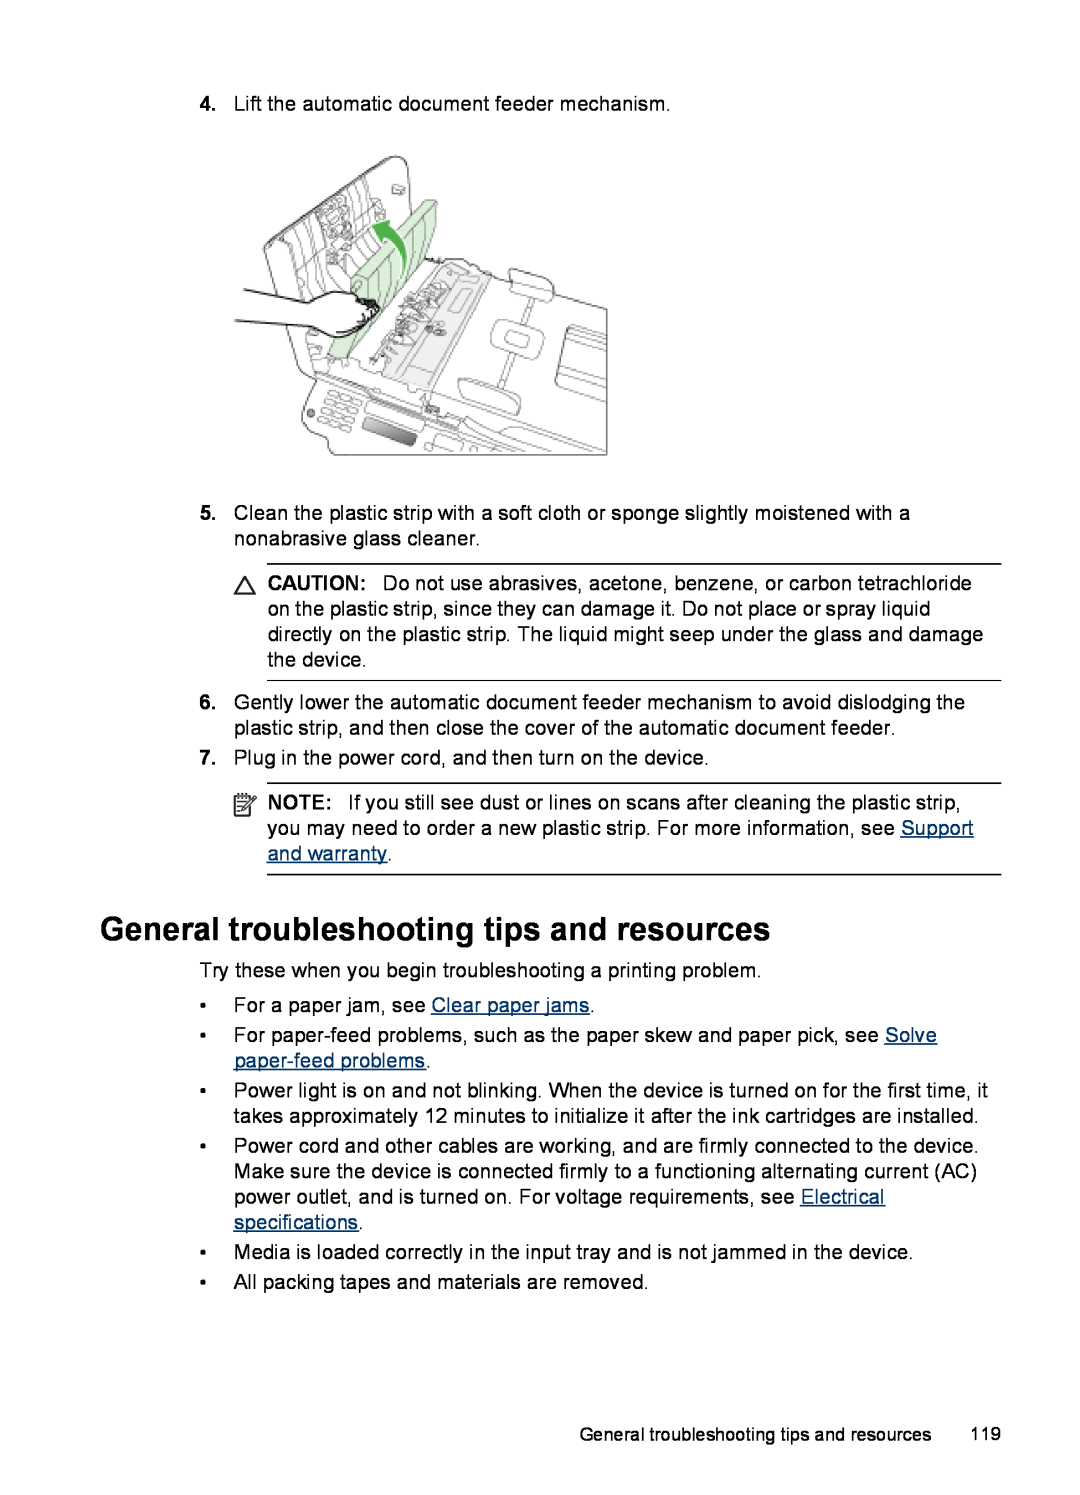 HP J4540, J4680, J4660, J4580, J4550 manual General troubleshooting tips and resources 